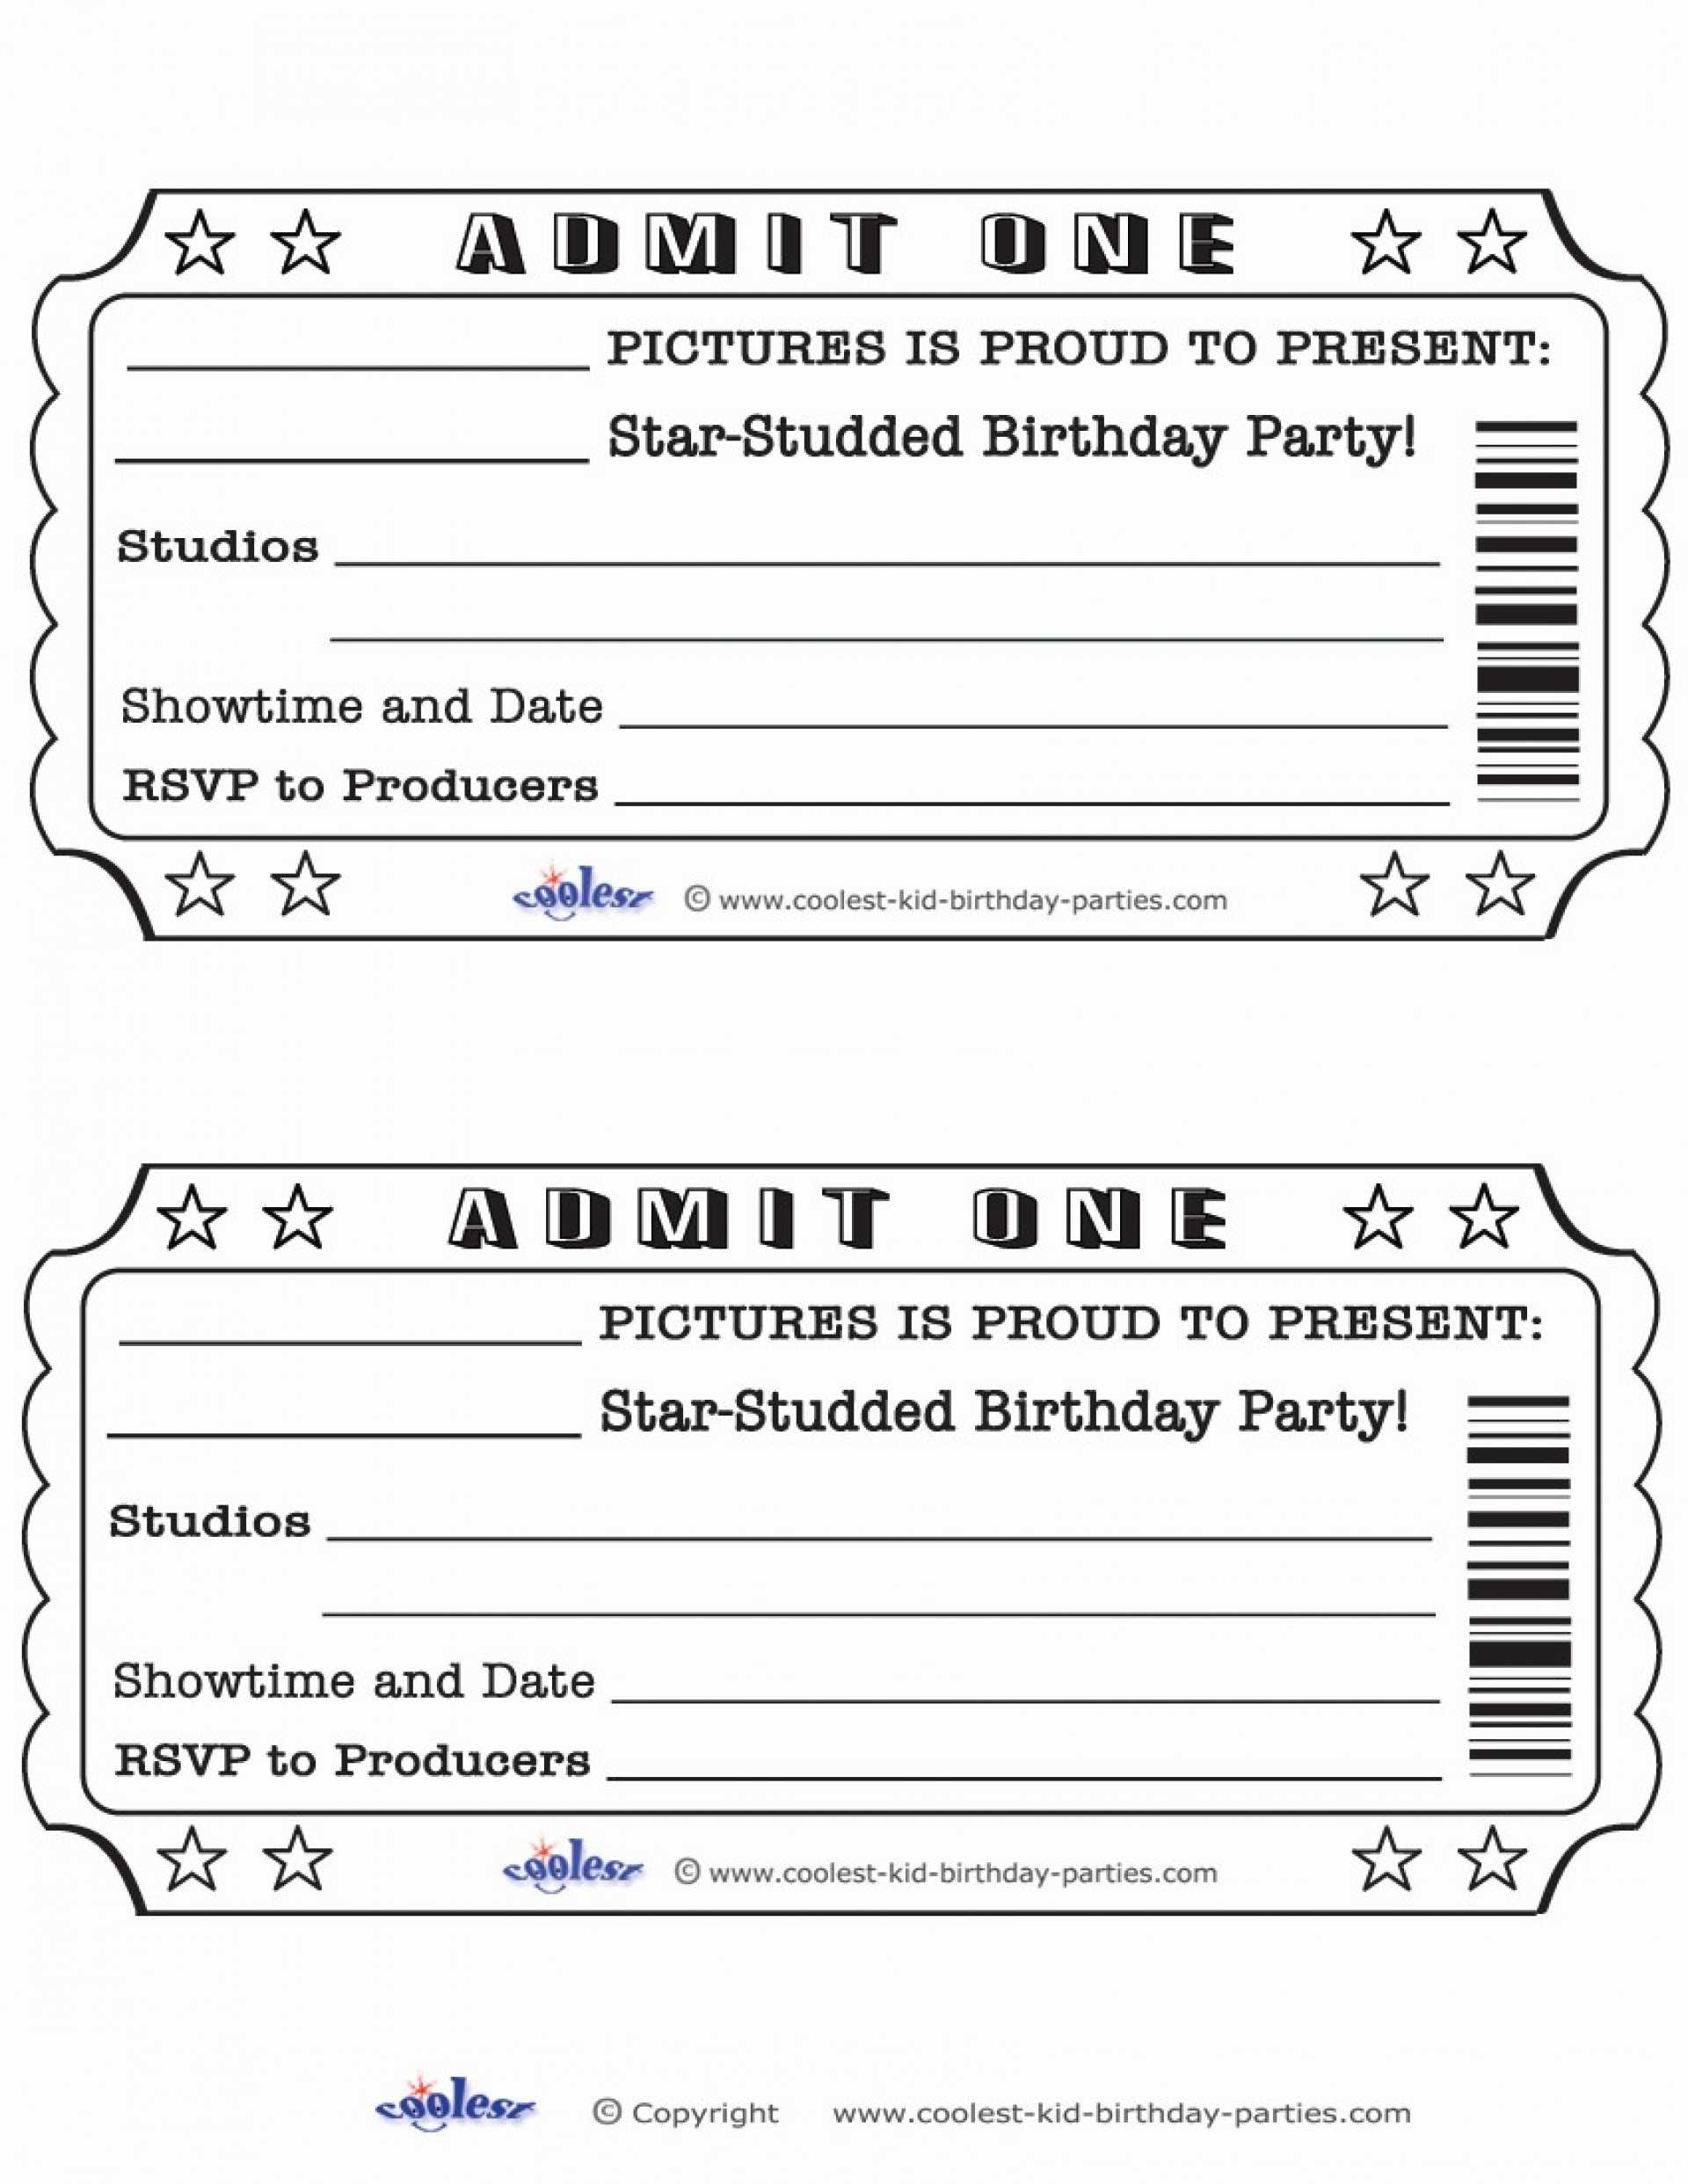 Printable Tickets Template That Are Clean – Debra Website Intended For Blank Parking Ticket Template